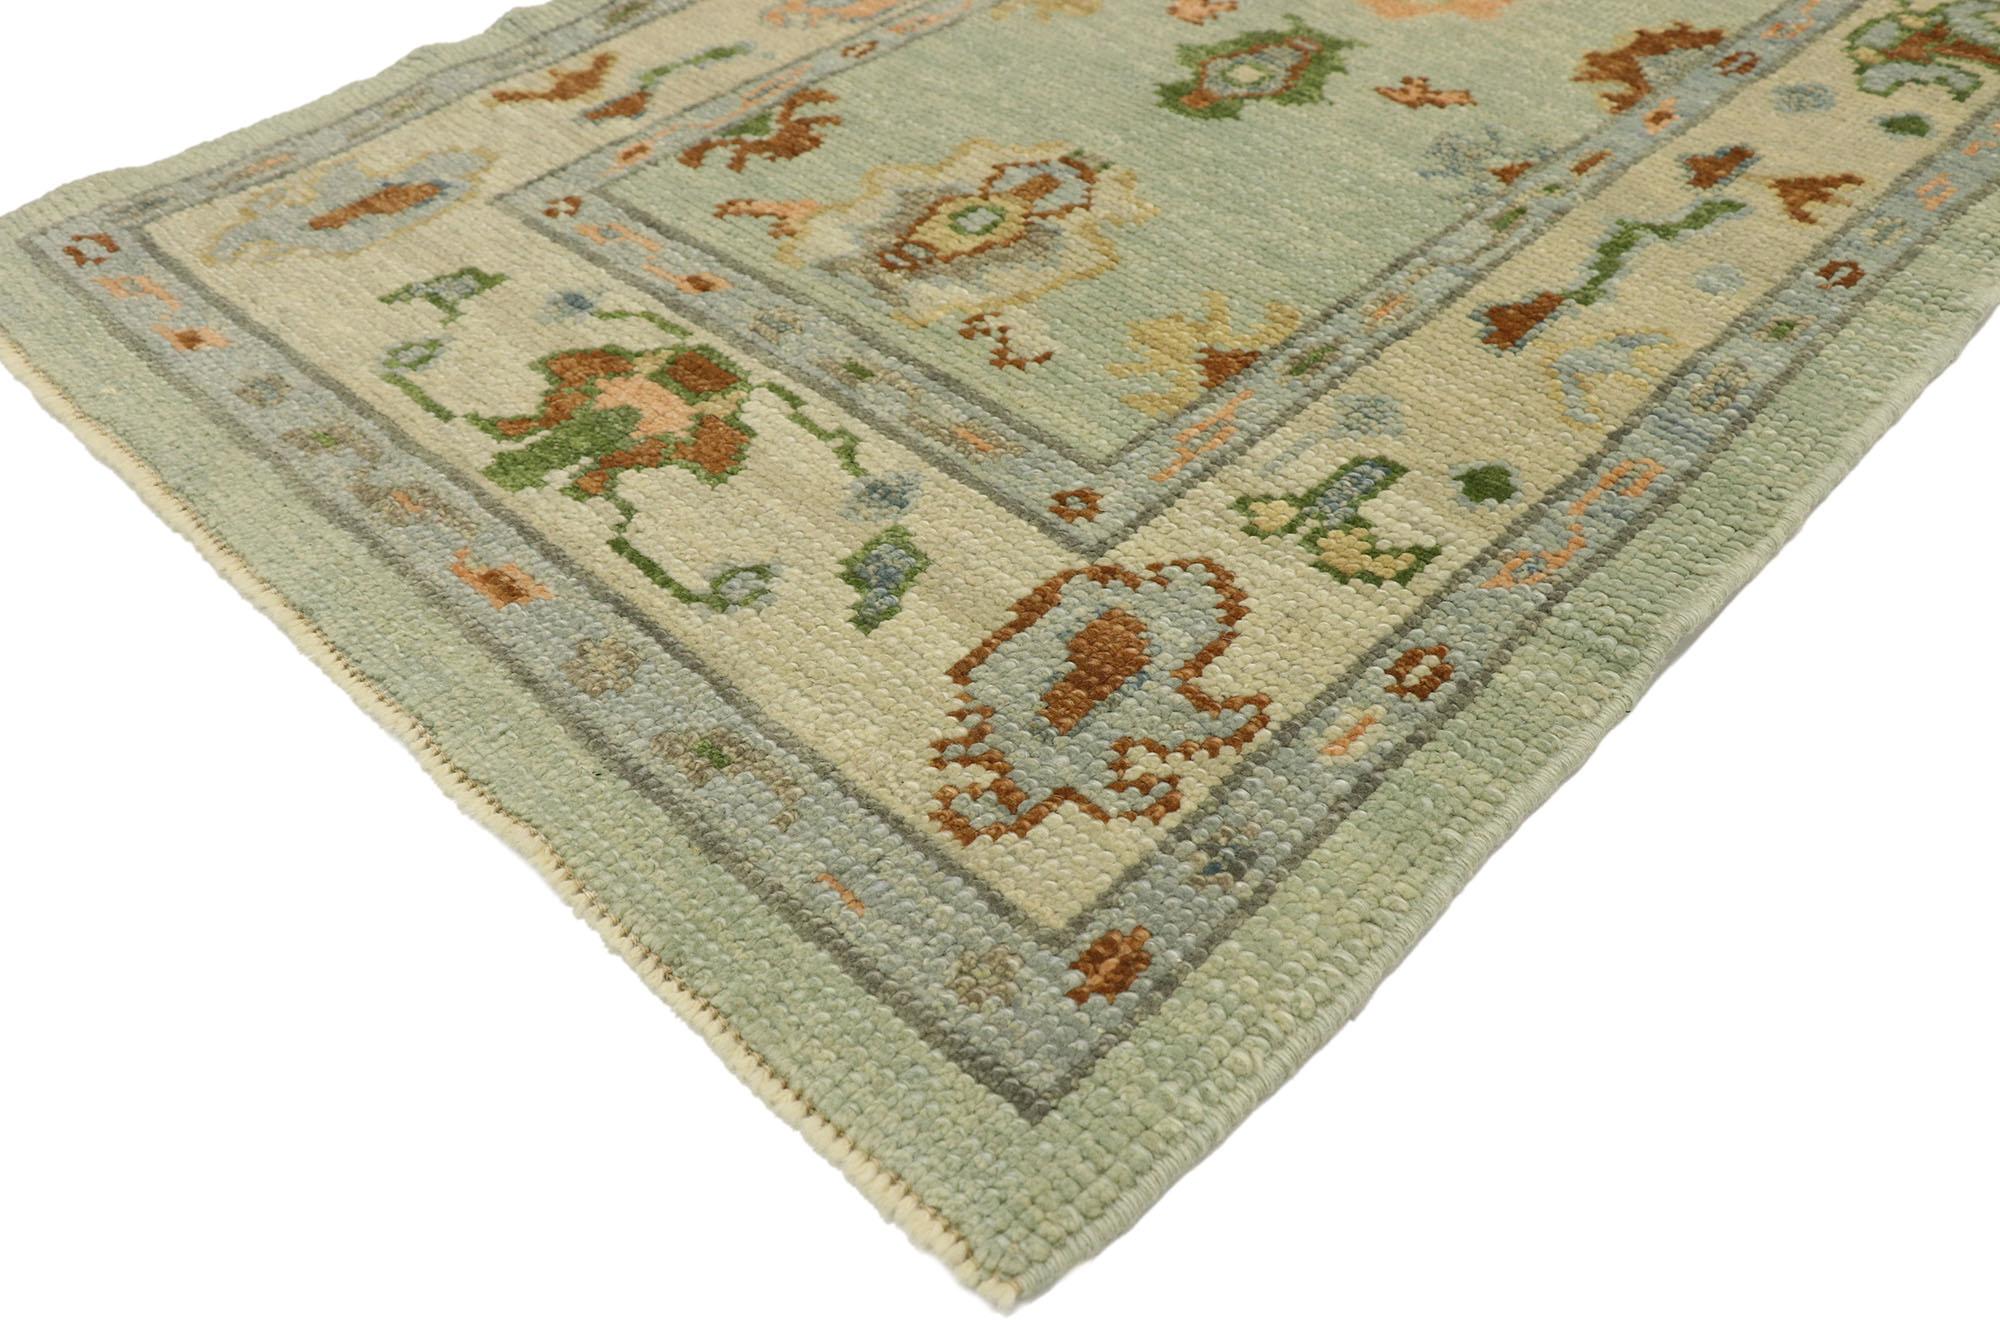 52824, new contemporary Turkish Oushak runner with modern style 02'10 x 07'01. This hand knotted wool new contemporary Turkish Oushak runner features an all-over botanical pattern composed of Harshang-style motifs, palmettes, stylized florals,